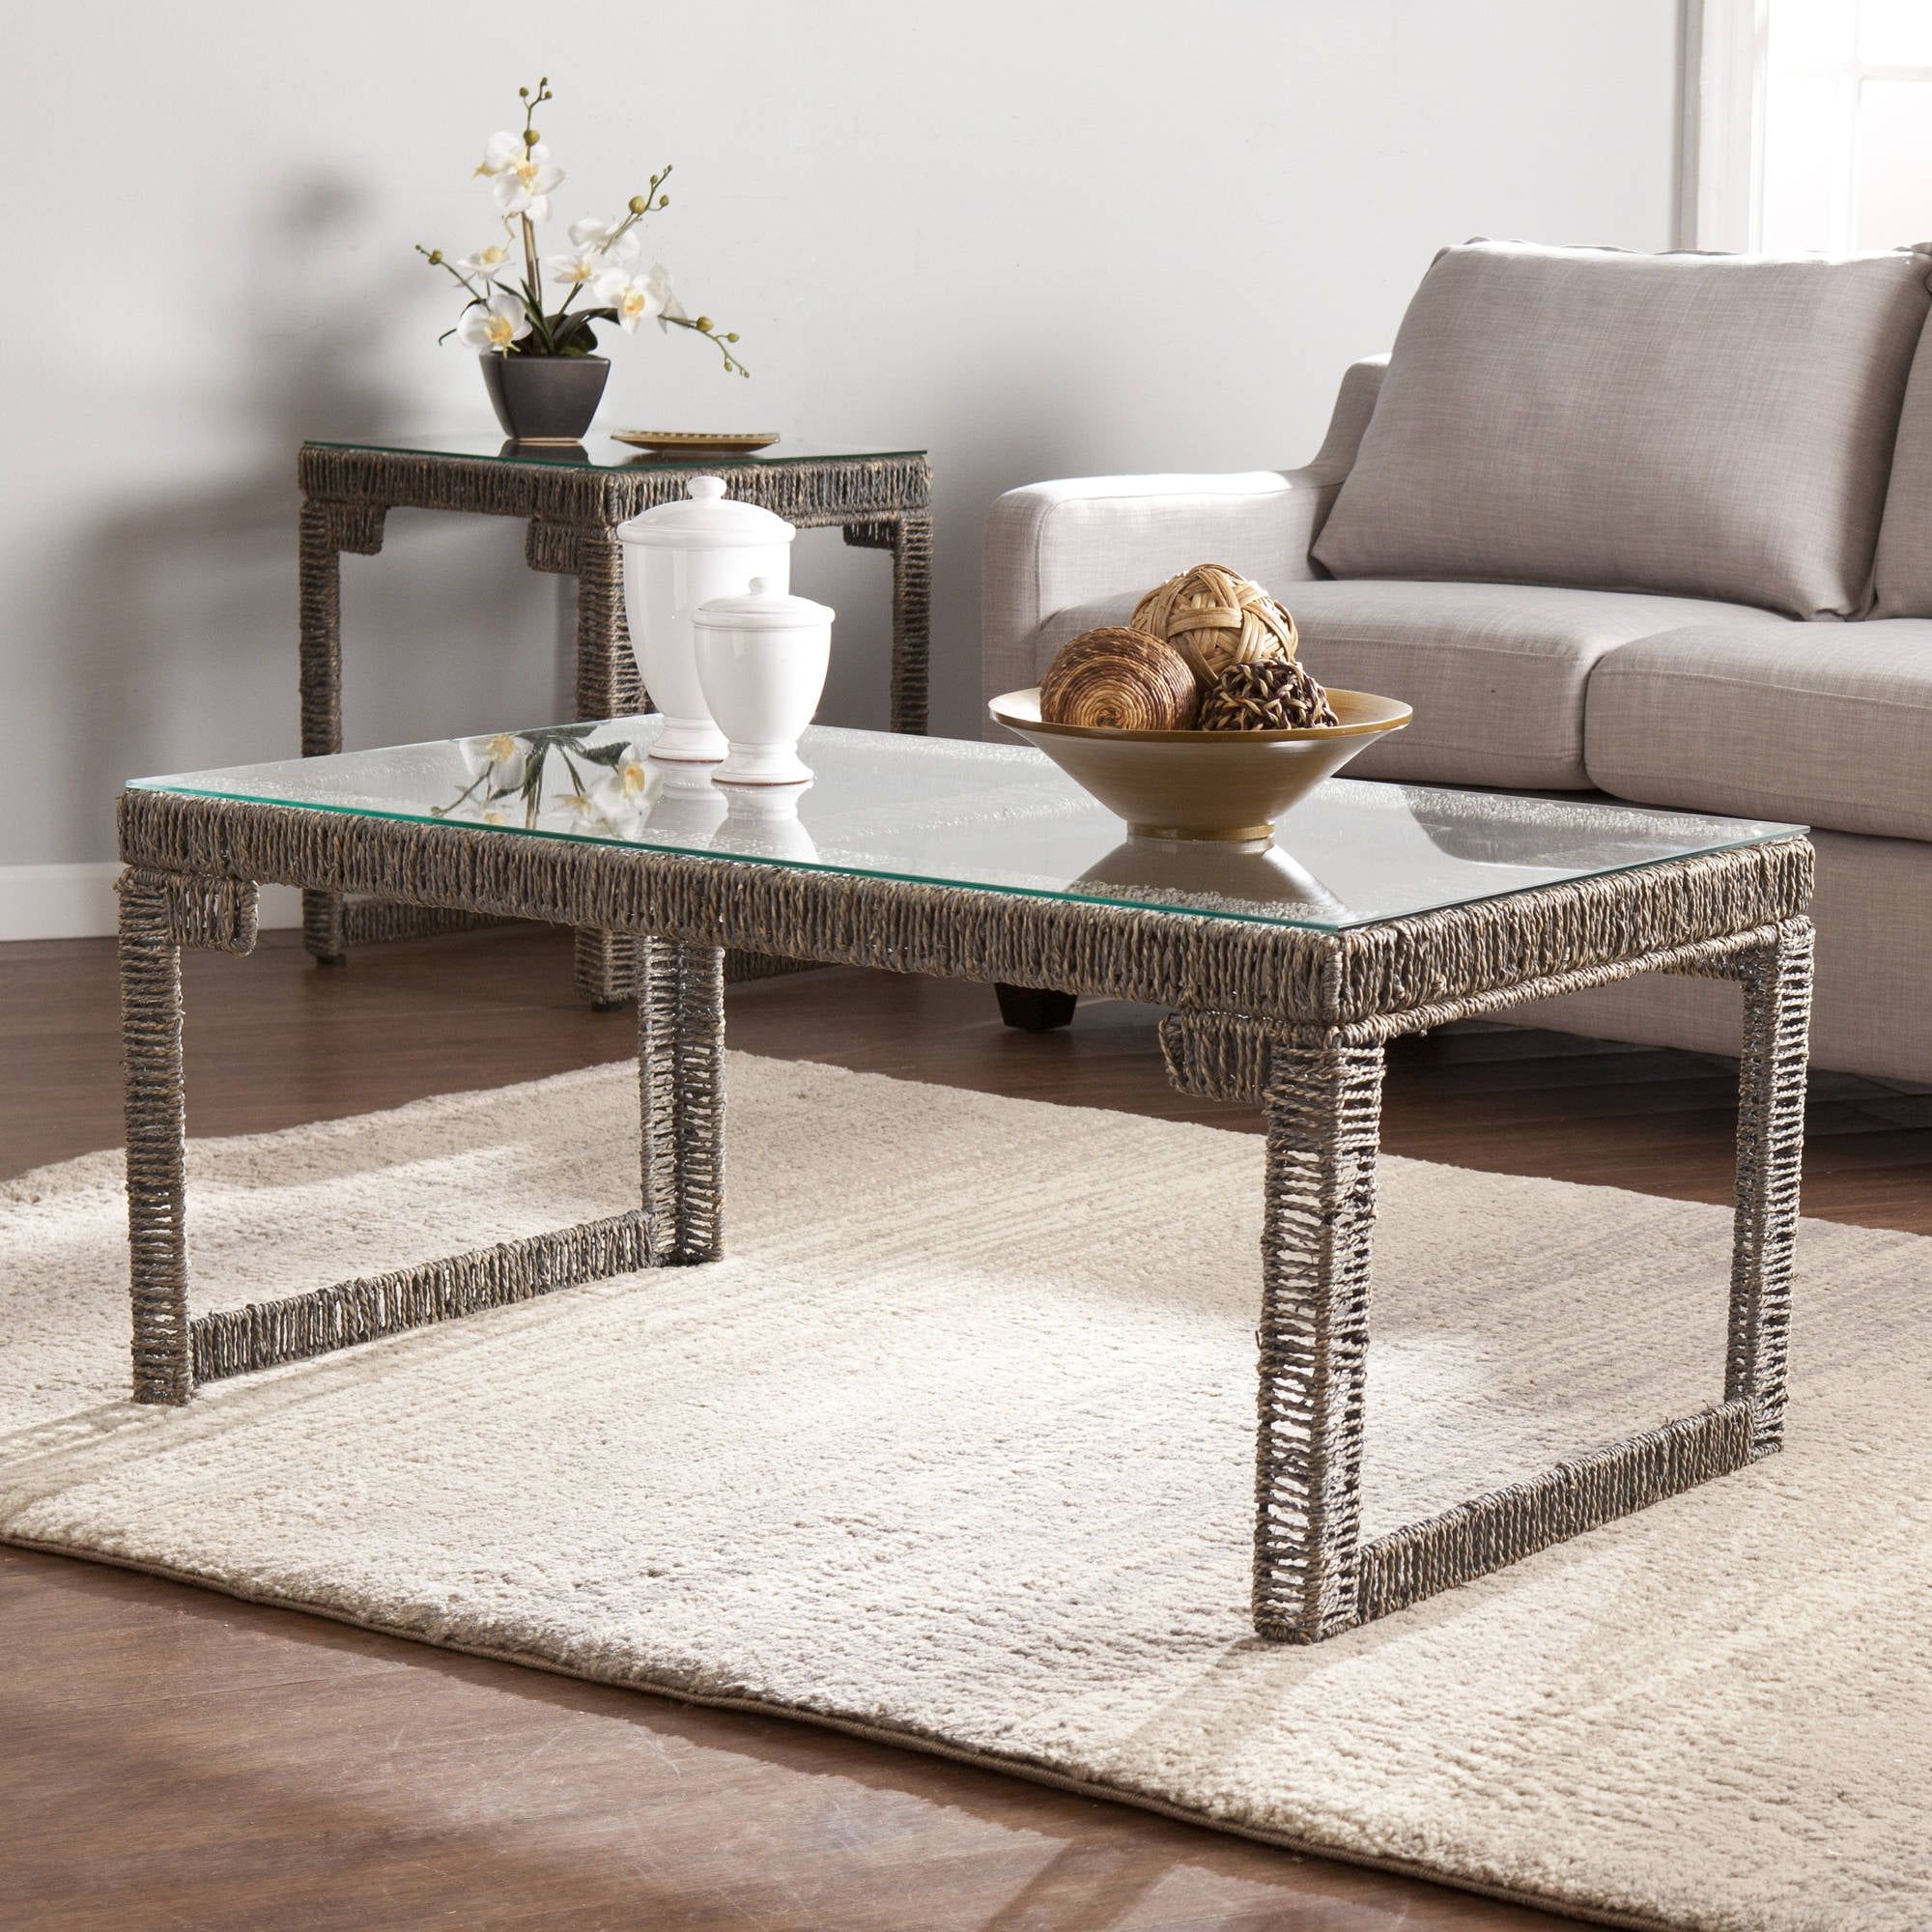 Southern Enterprises Arayes Hyacinth And Glass Coffee Table, Gray Regarding Southern Enterprises Larksmill Coffee Tables (Gallery 16 of 20)